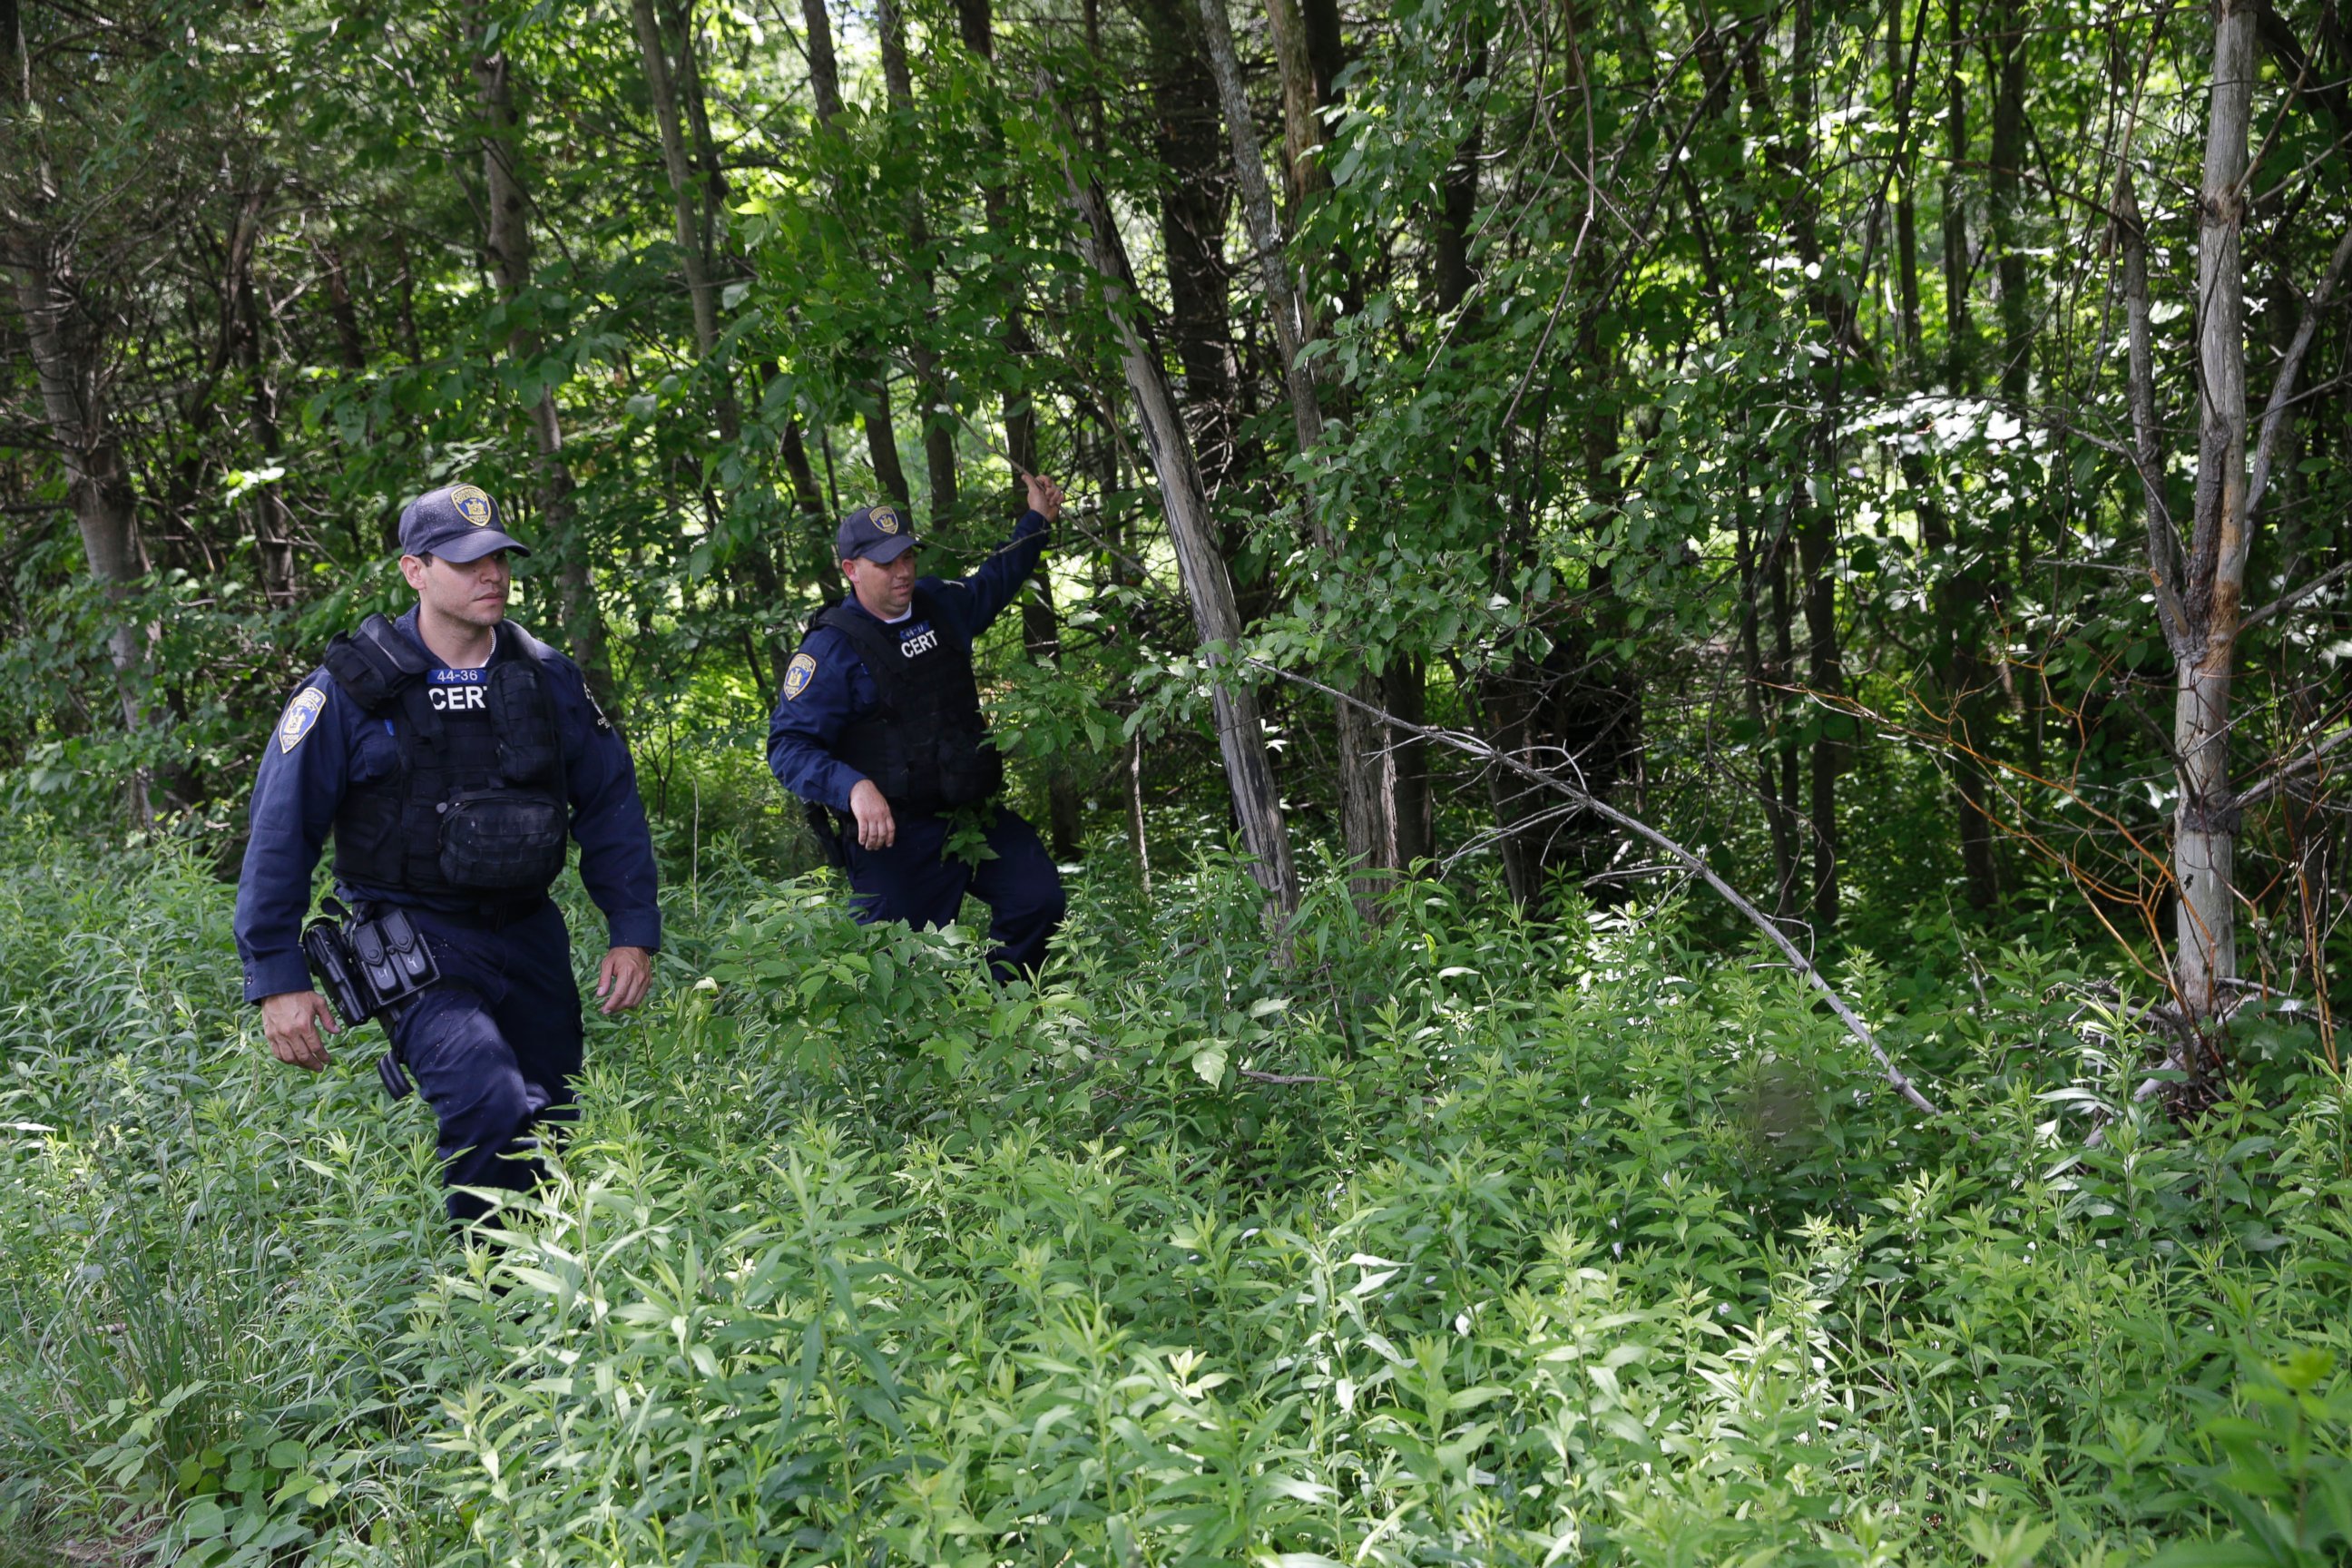 PHOTO: Authorities search an area in Constable, N.Y. for convicted murderers Richard Matt and David Sweat, June 26, 2015.